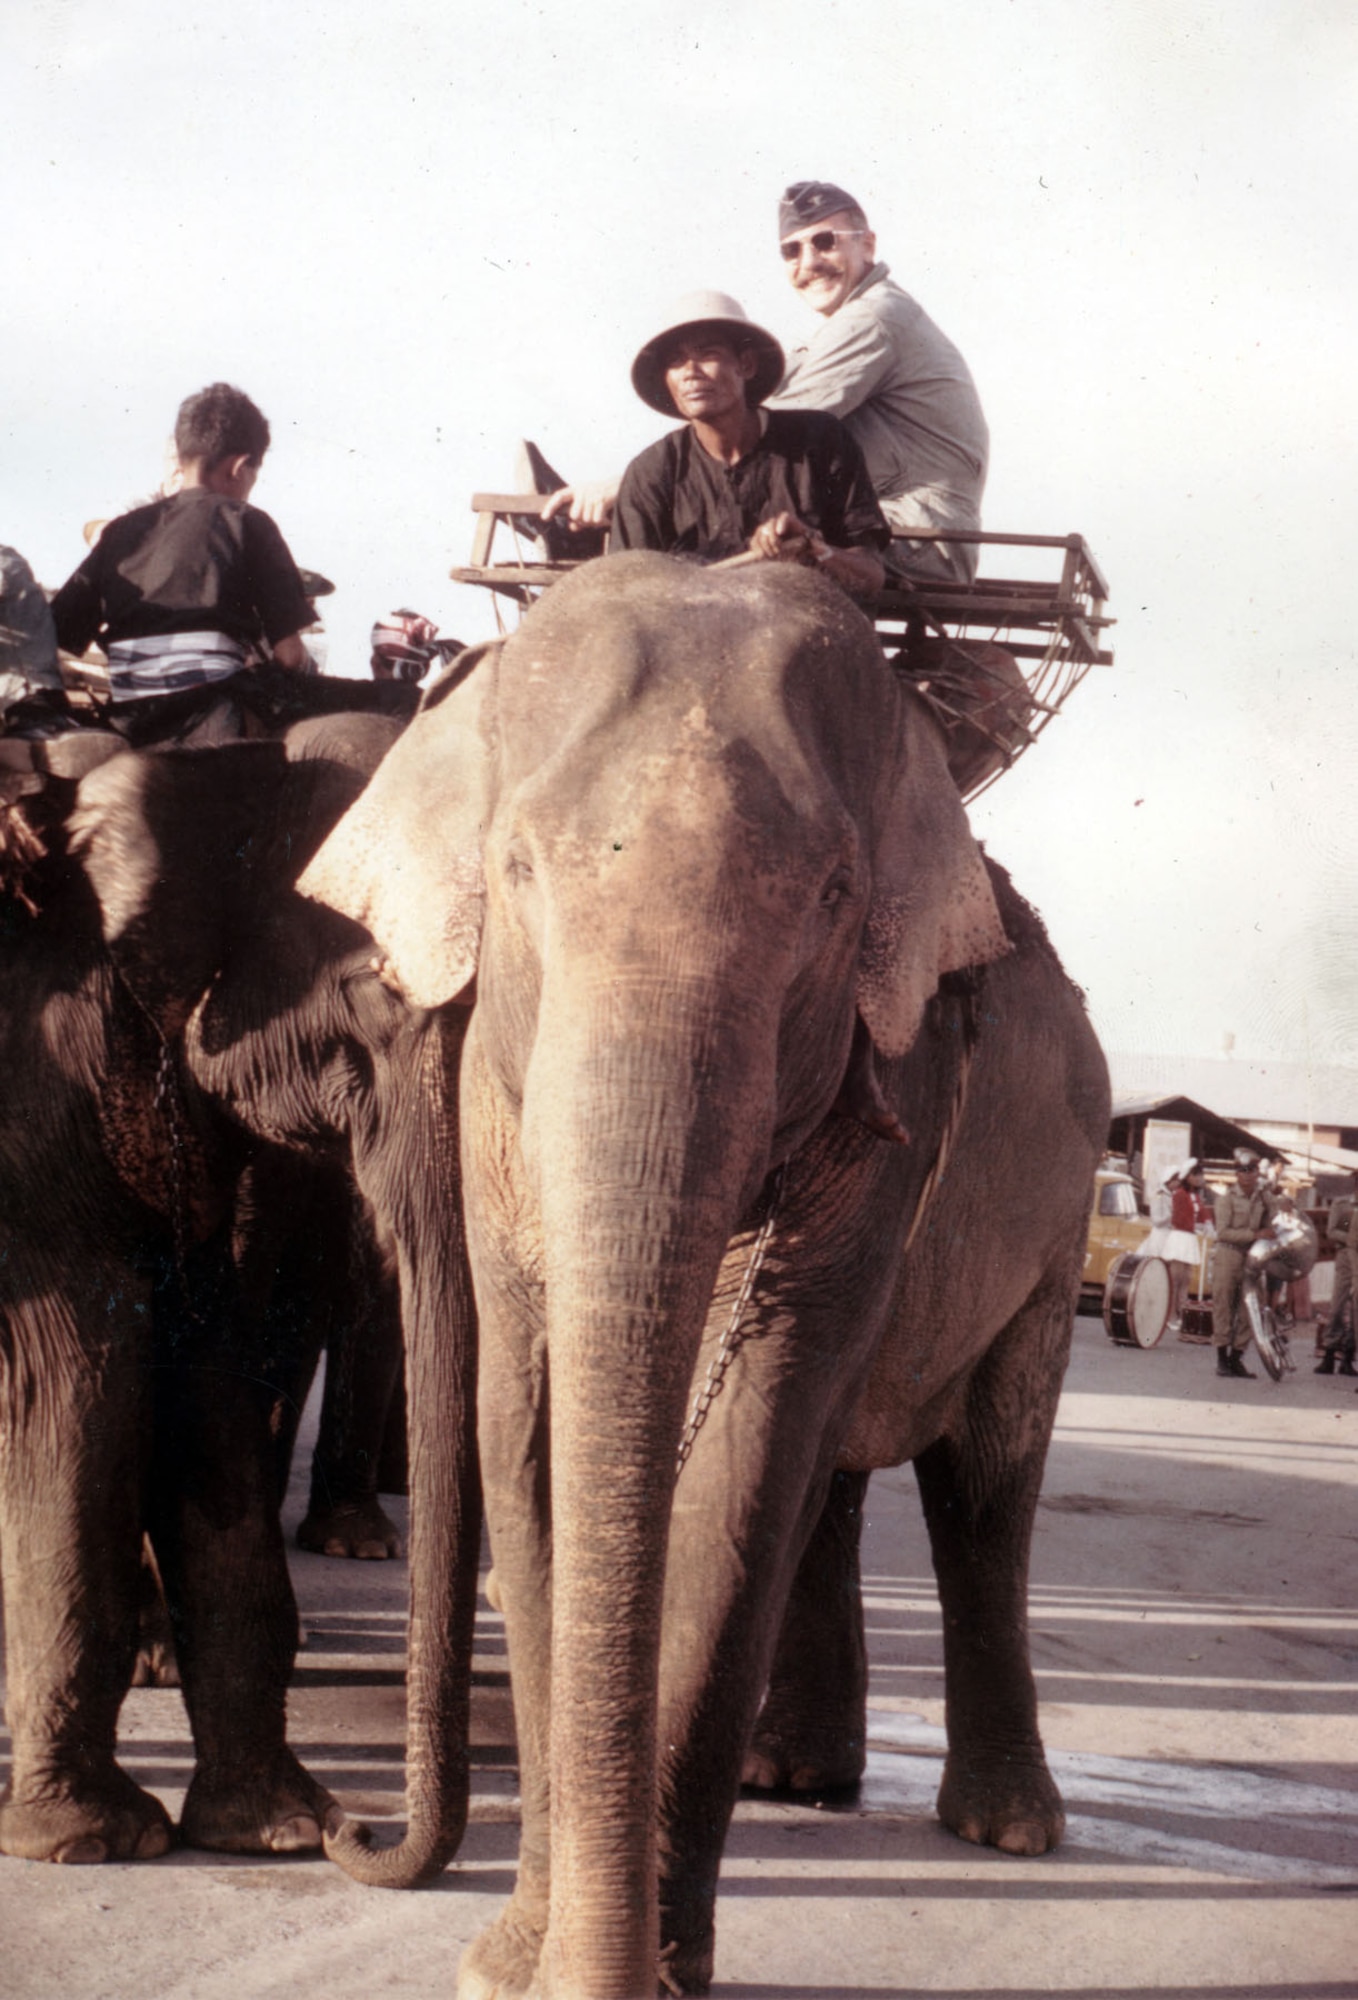 In addition to the very serious business of developing better tactics, the “practice reunions” also involved parades, lots of humor and fraternal events. Here, Col. Robin Olds rides an elephant from the flightline to the officer’s club. (U.S. Air Force photo)